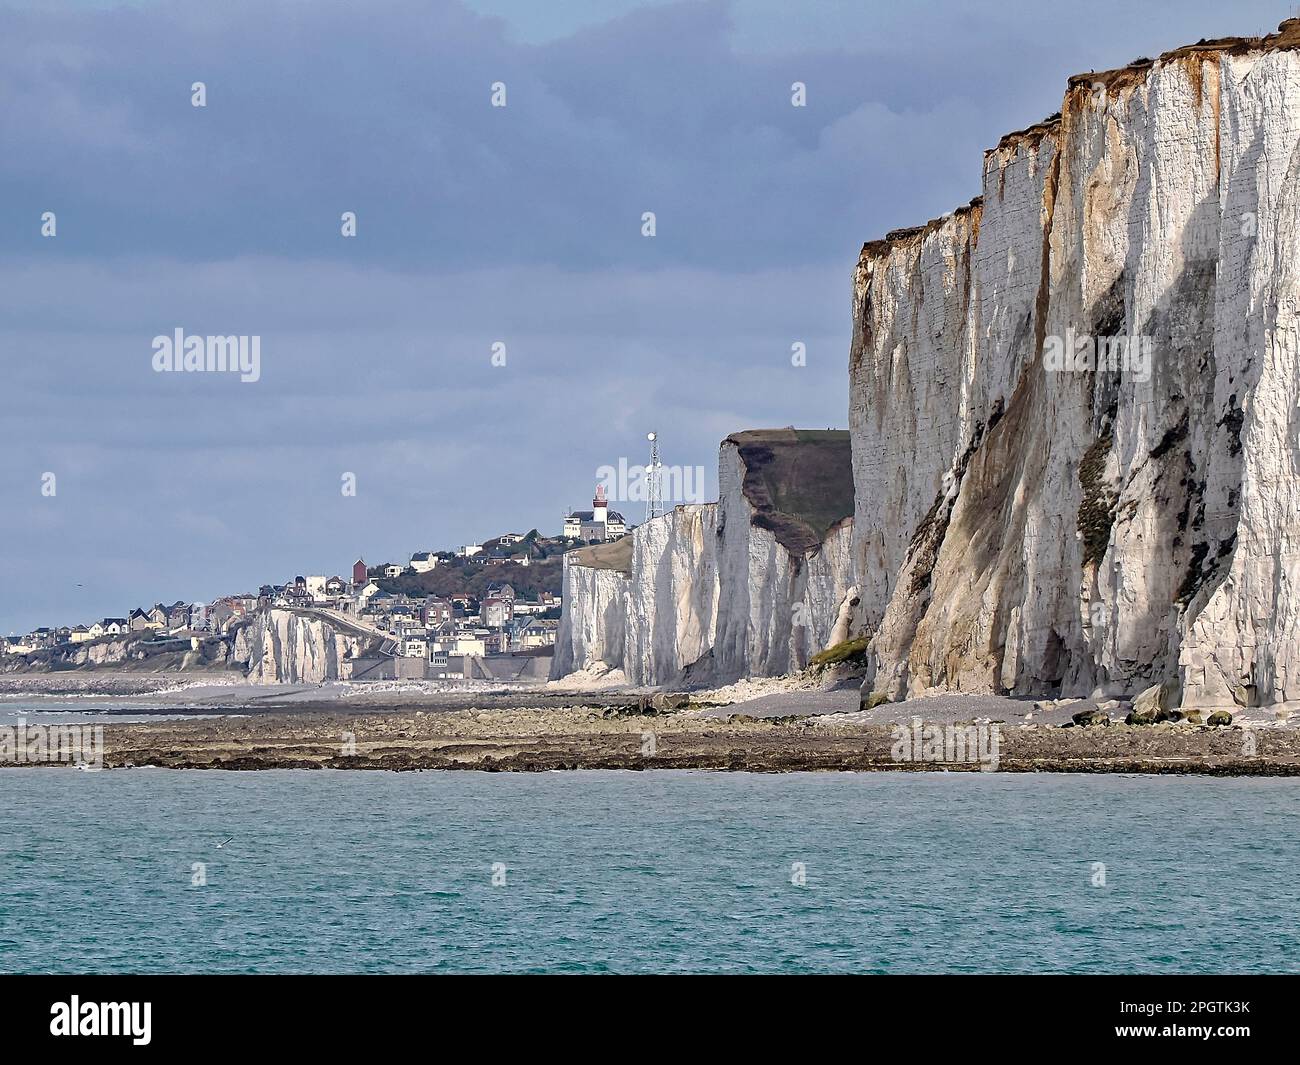 Cliff of Le treport, a commune in the Seine-Maritime department in Normandy, in northwestern France. Stock Photo